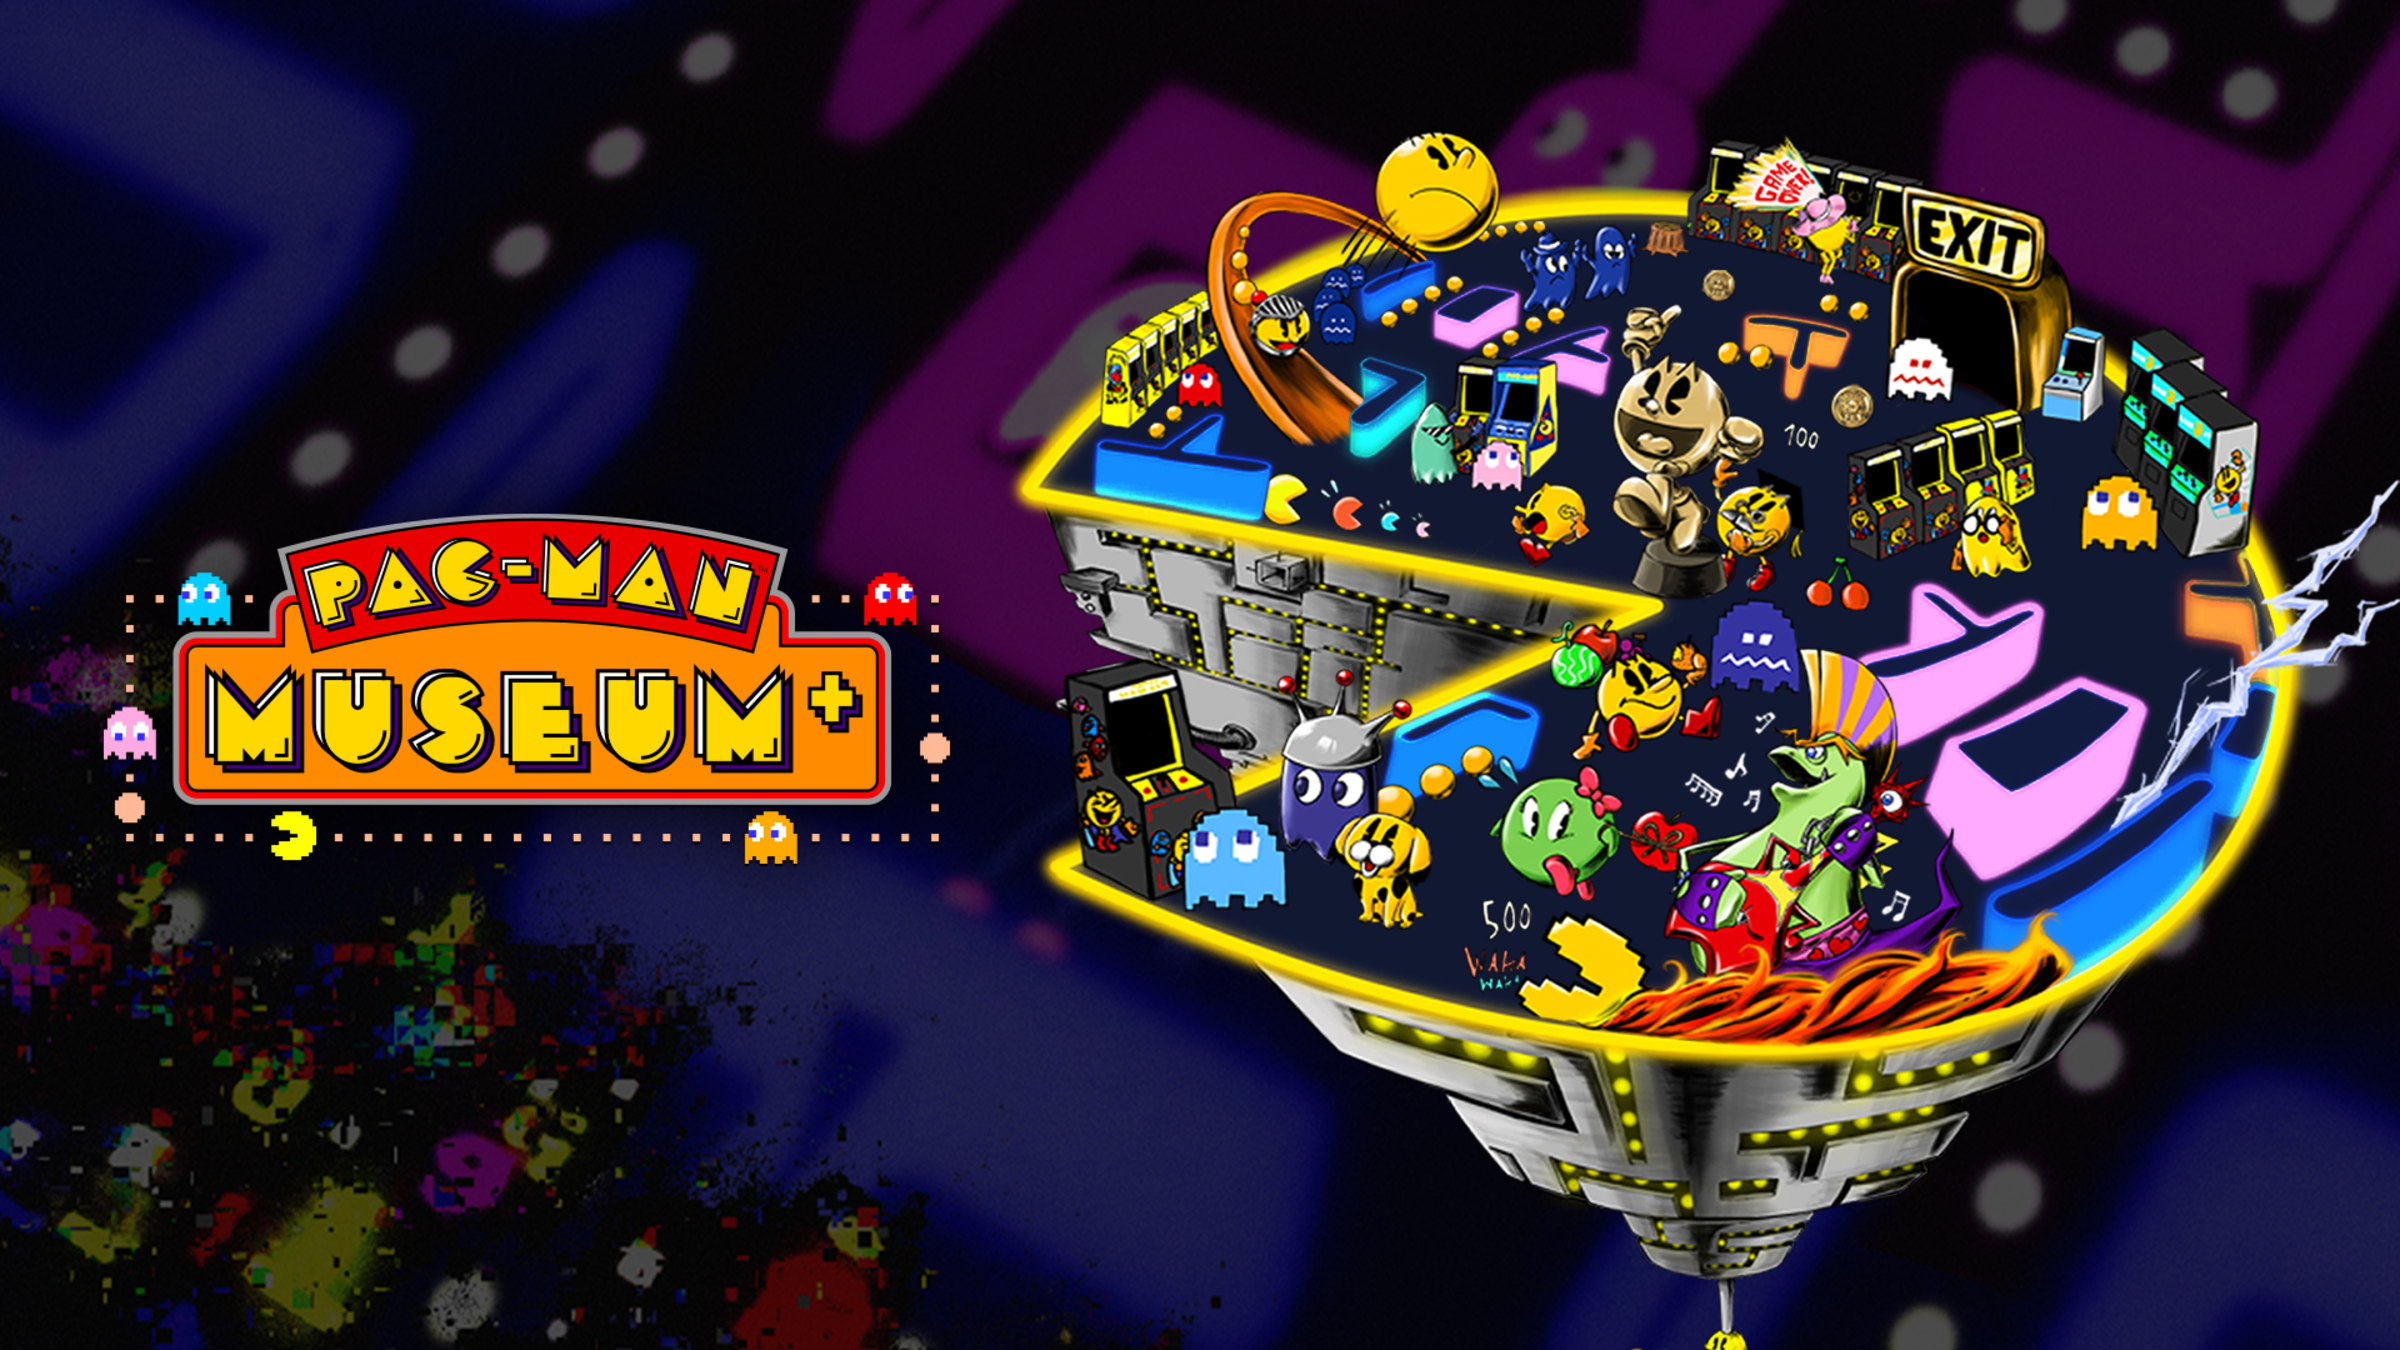 Pac-Man Battle Royale Game Announced After Pac-Man 99 Closure